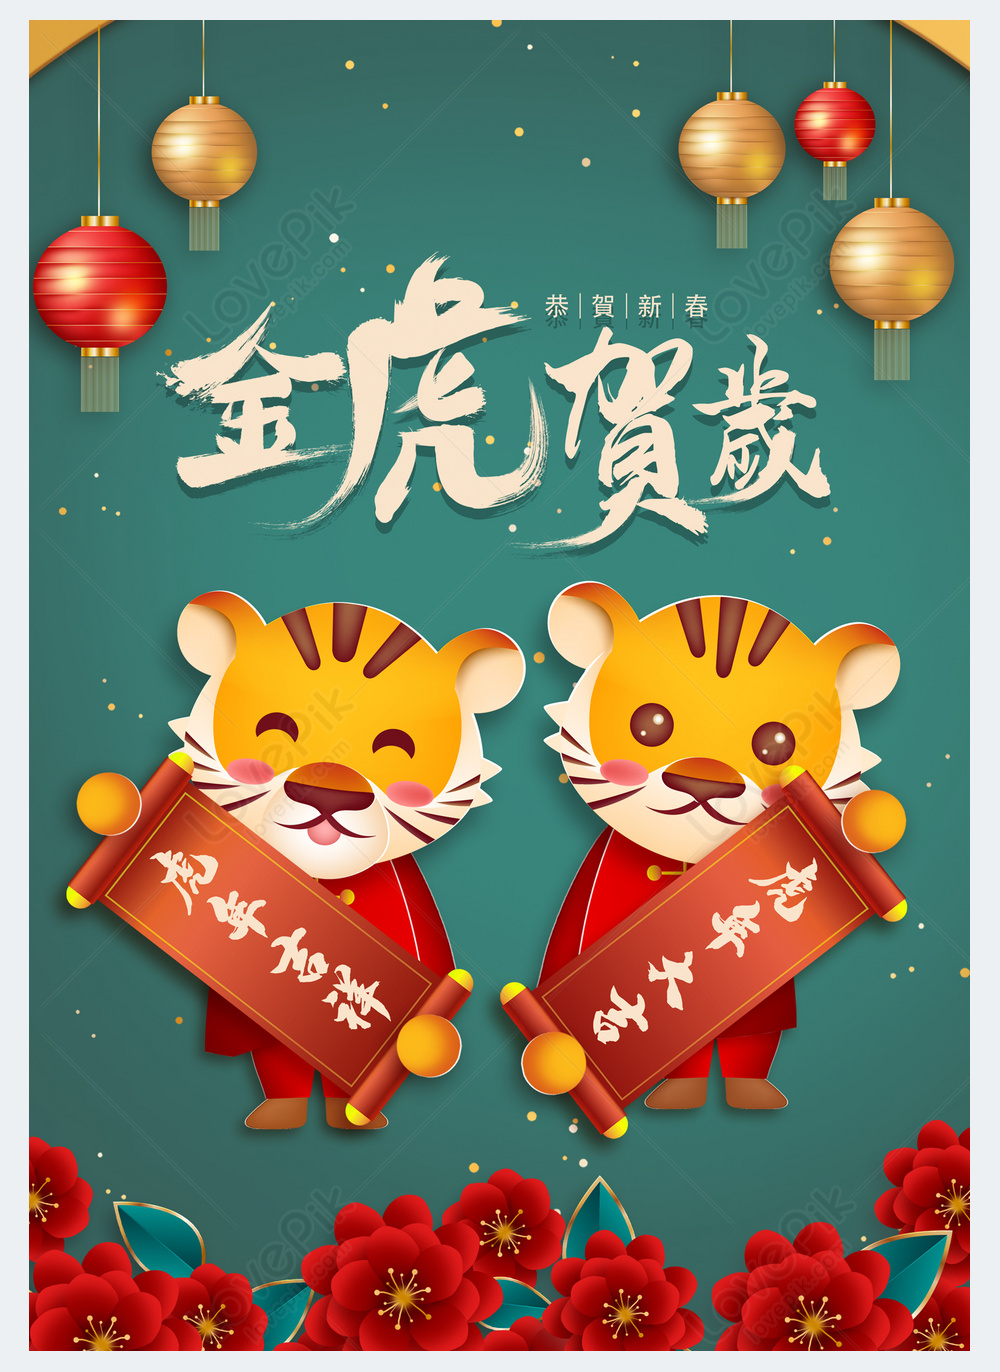 Chinese lunar new year simple creative green poster template image